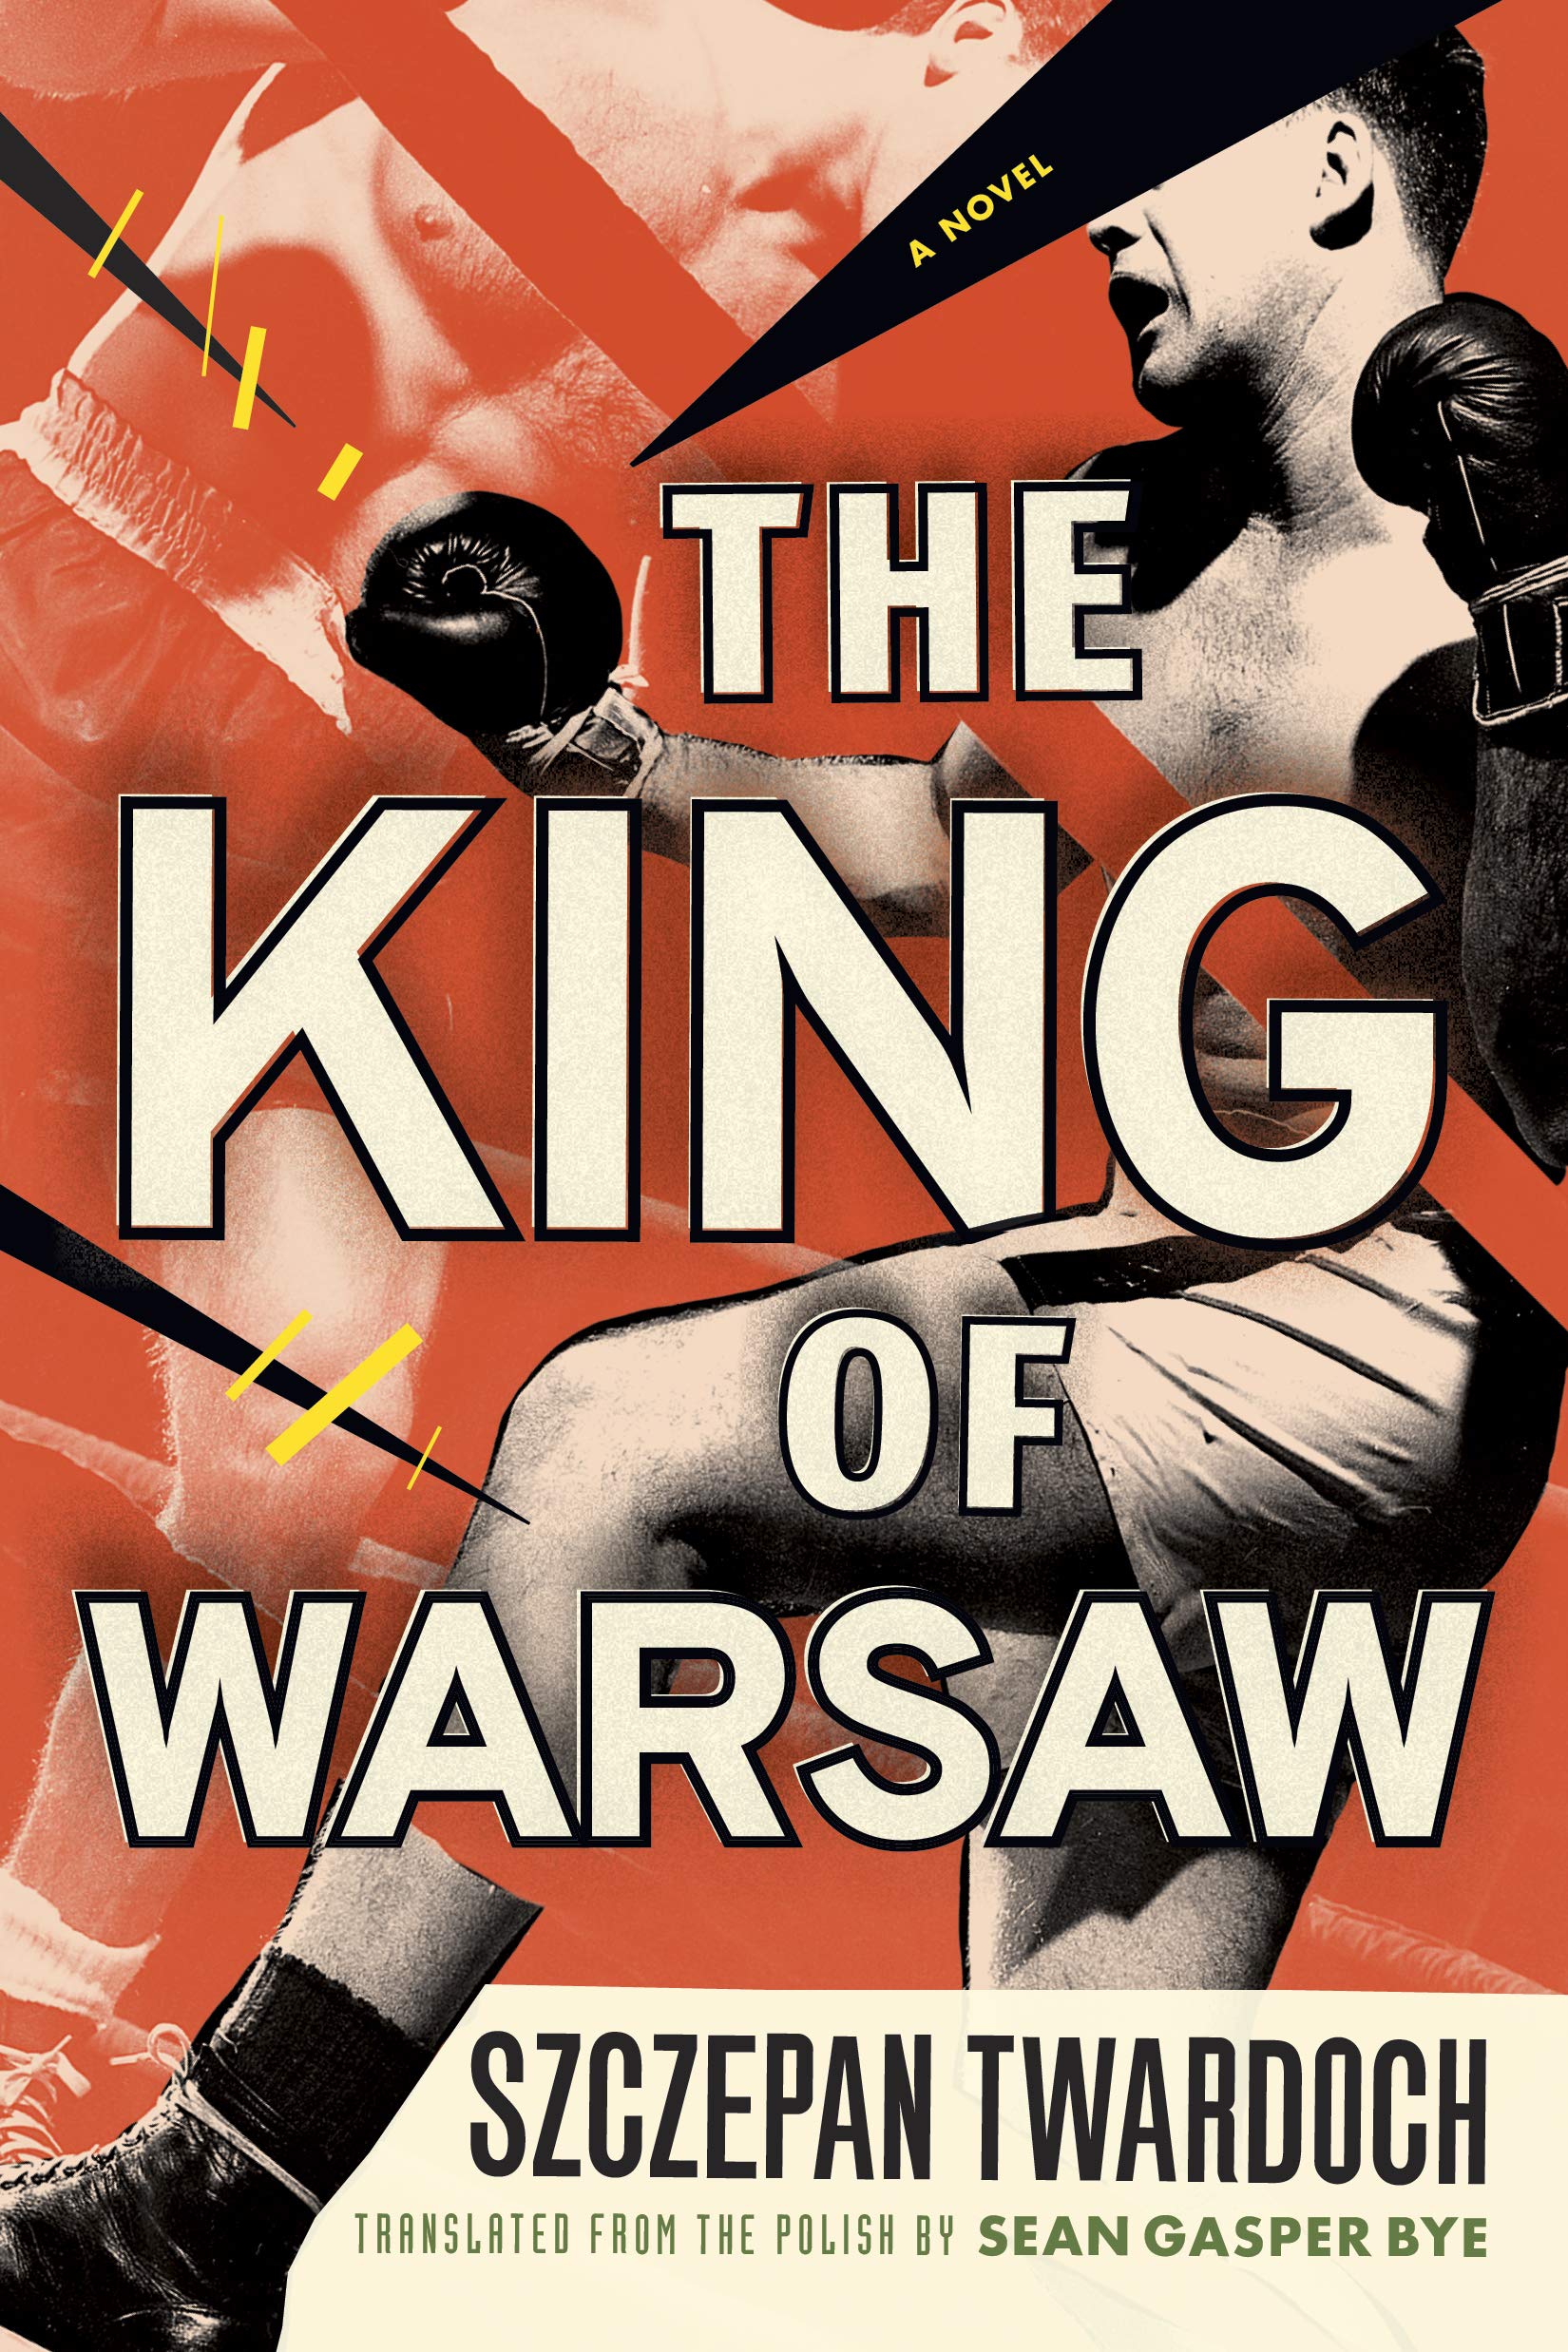 Buy The King of Warsaw: A Novel Book Online at Low Prices in India | The  King of Warsaw: A Novel Reviews & Ratings - Amazon.in